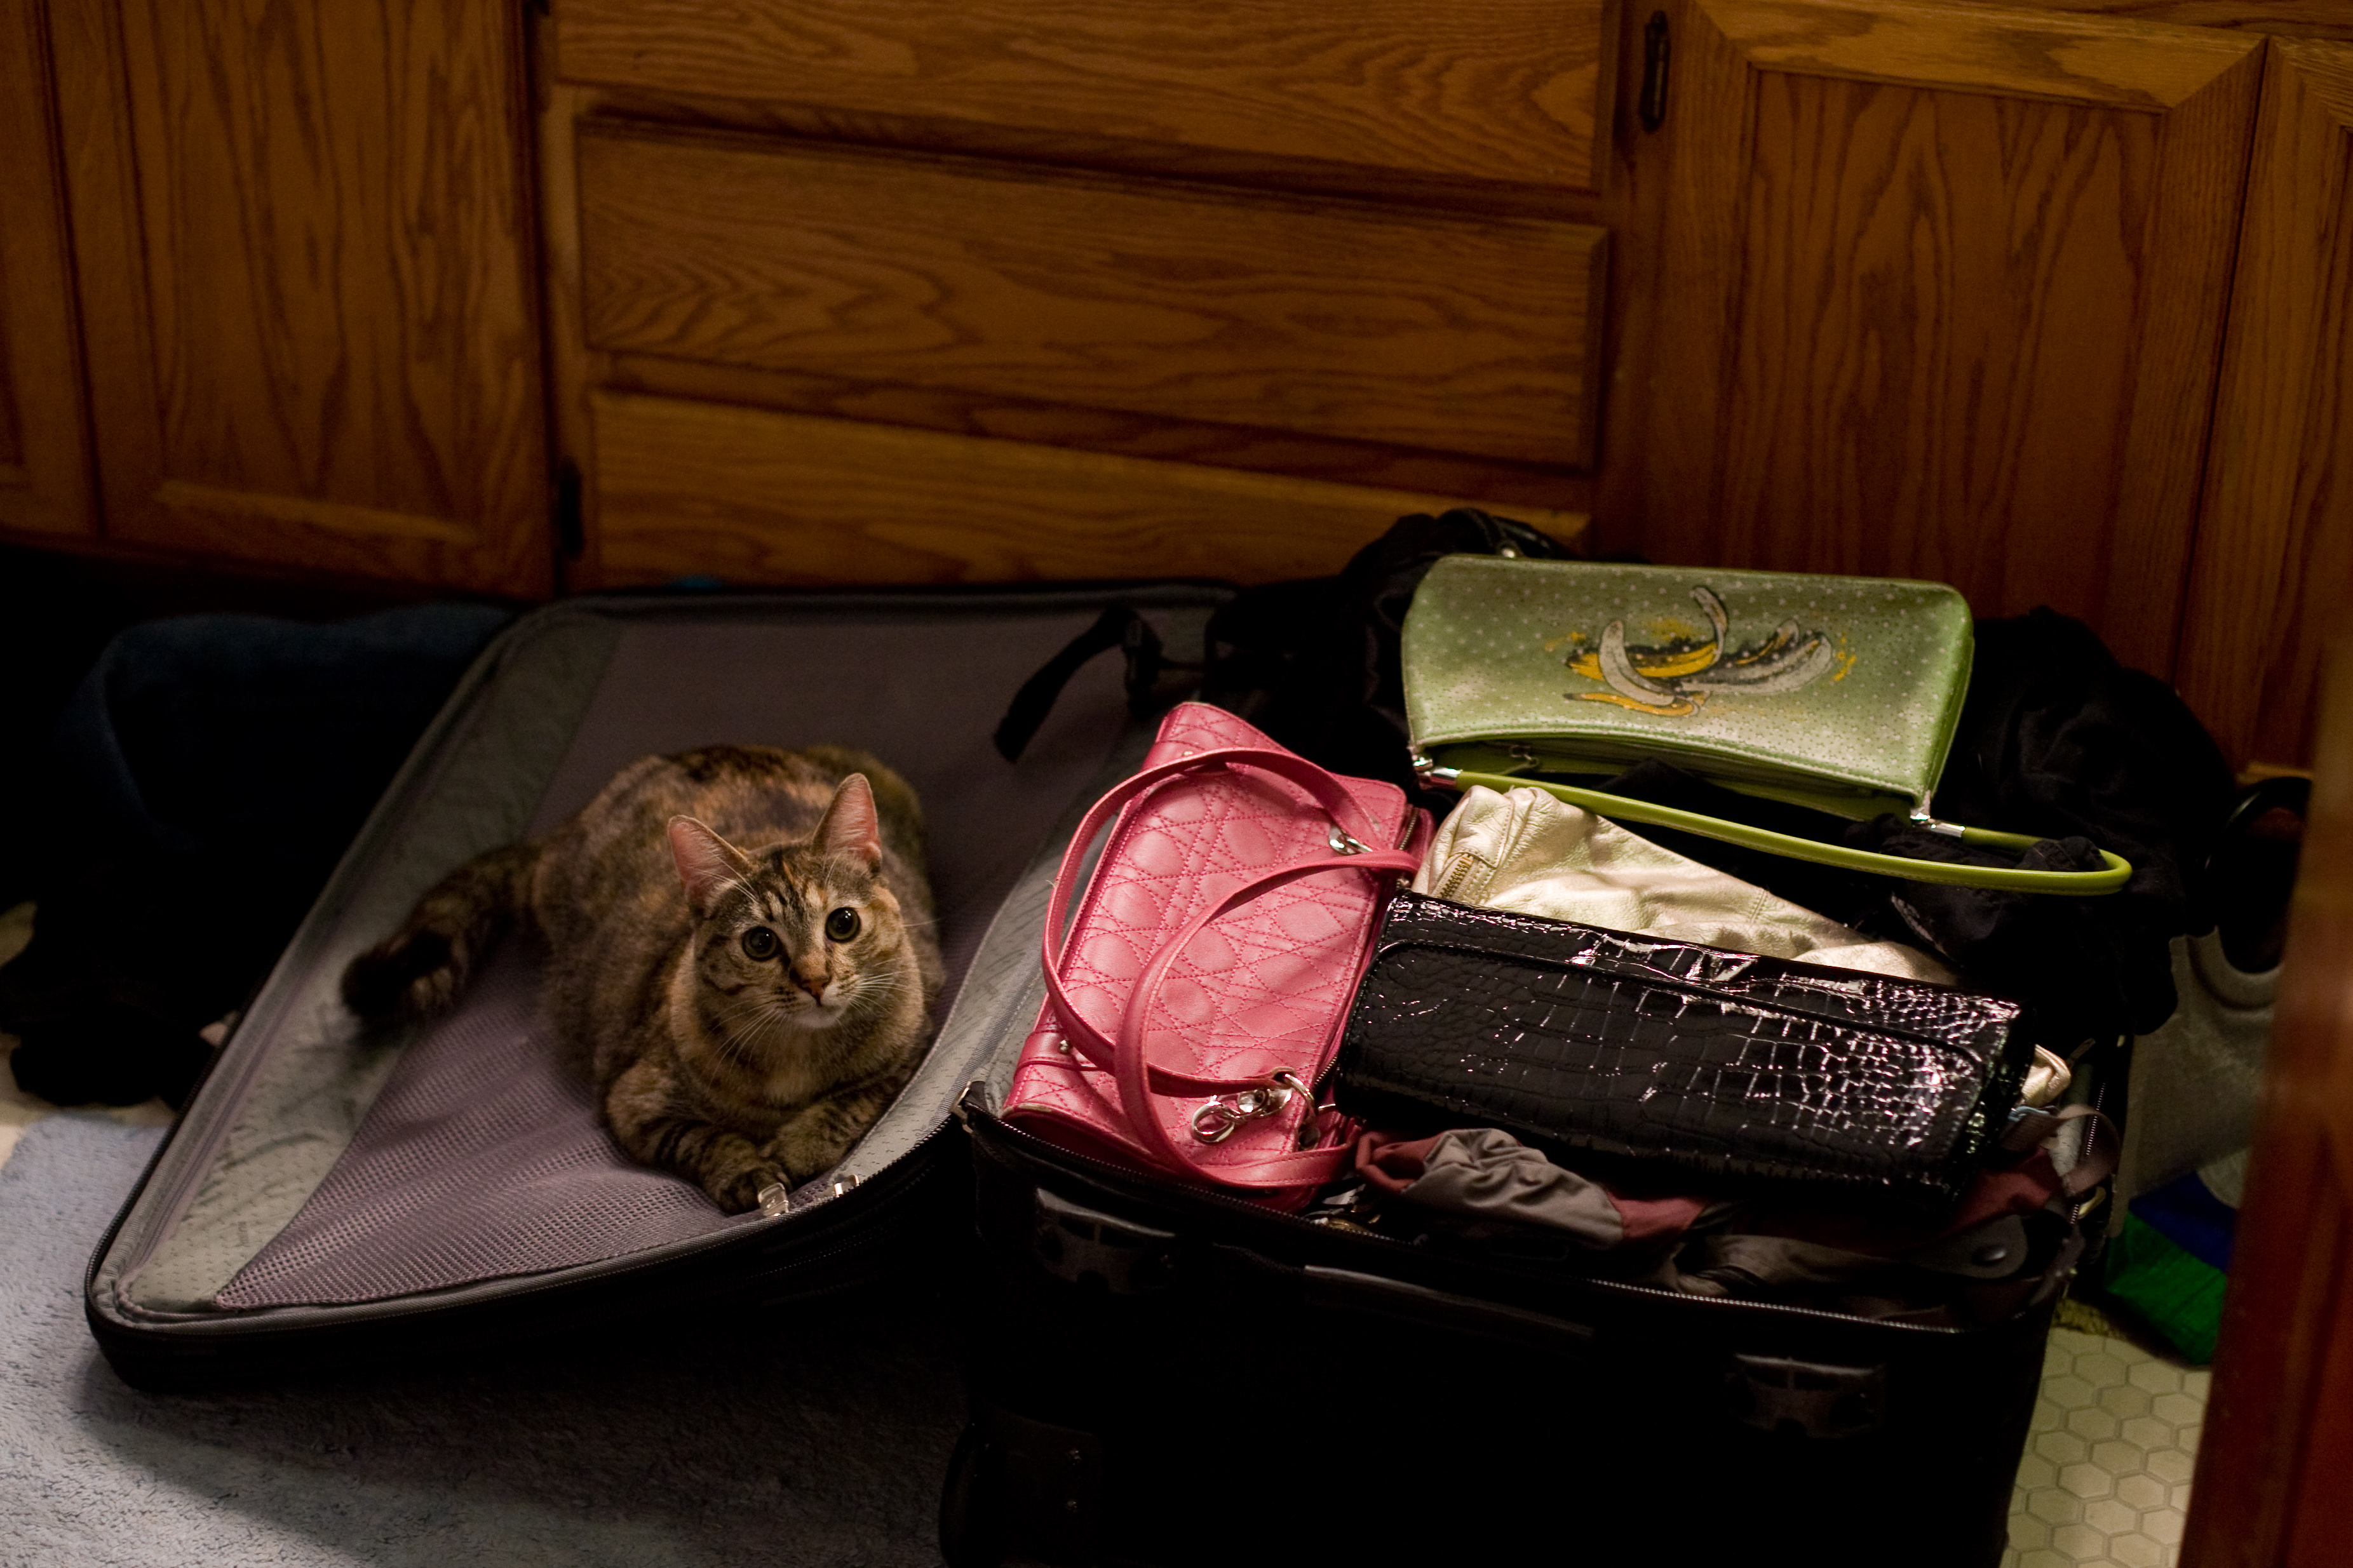 When figuring out how to pack for a European vacation, the first step is to not forget to bring your kitty with you (just kidding, leave'em with a house sitter) ... photo by CC user nerdcoregirl on Flickr